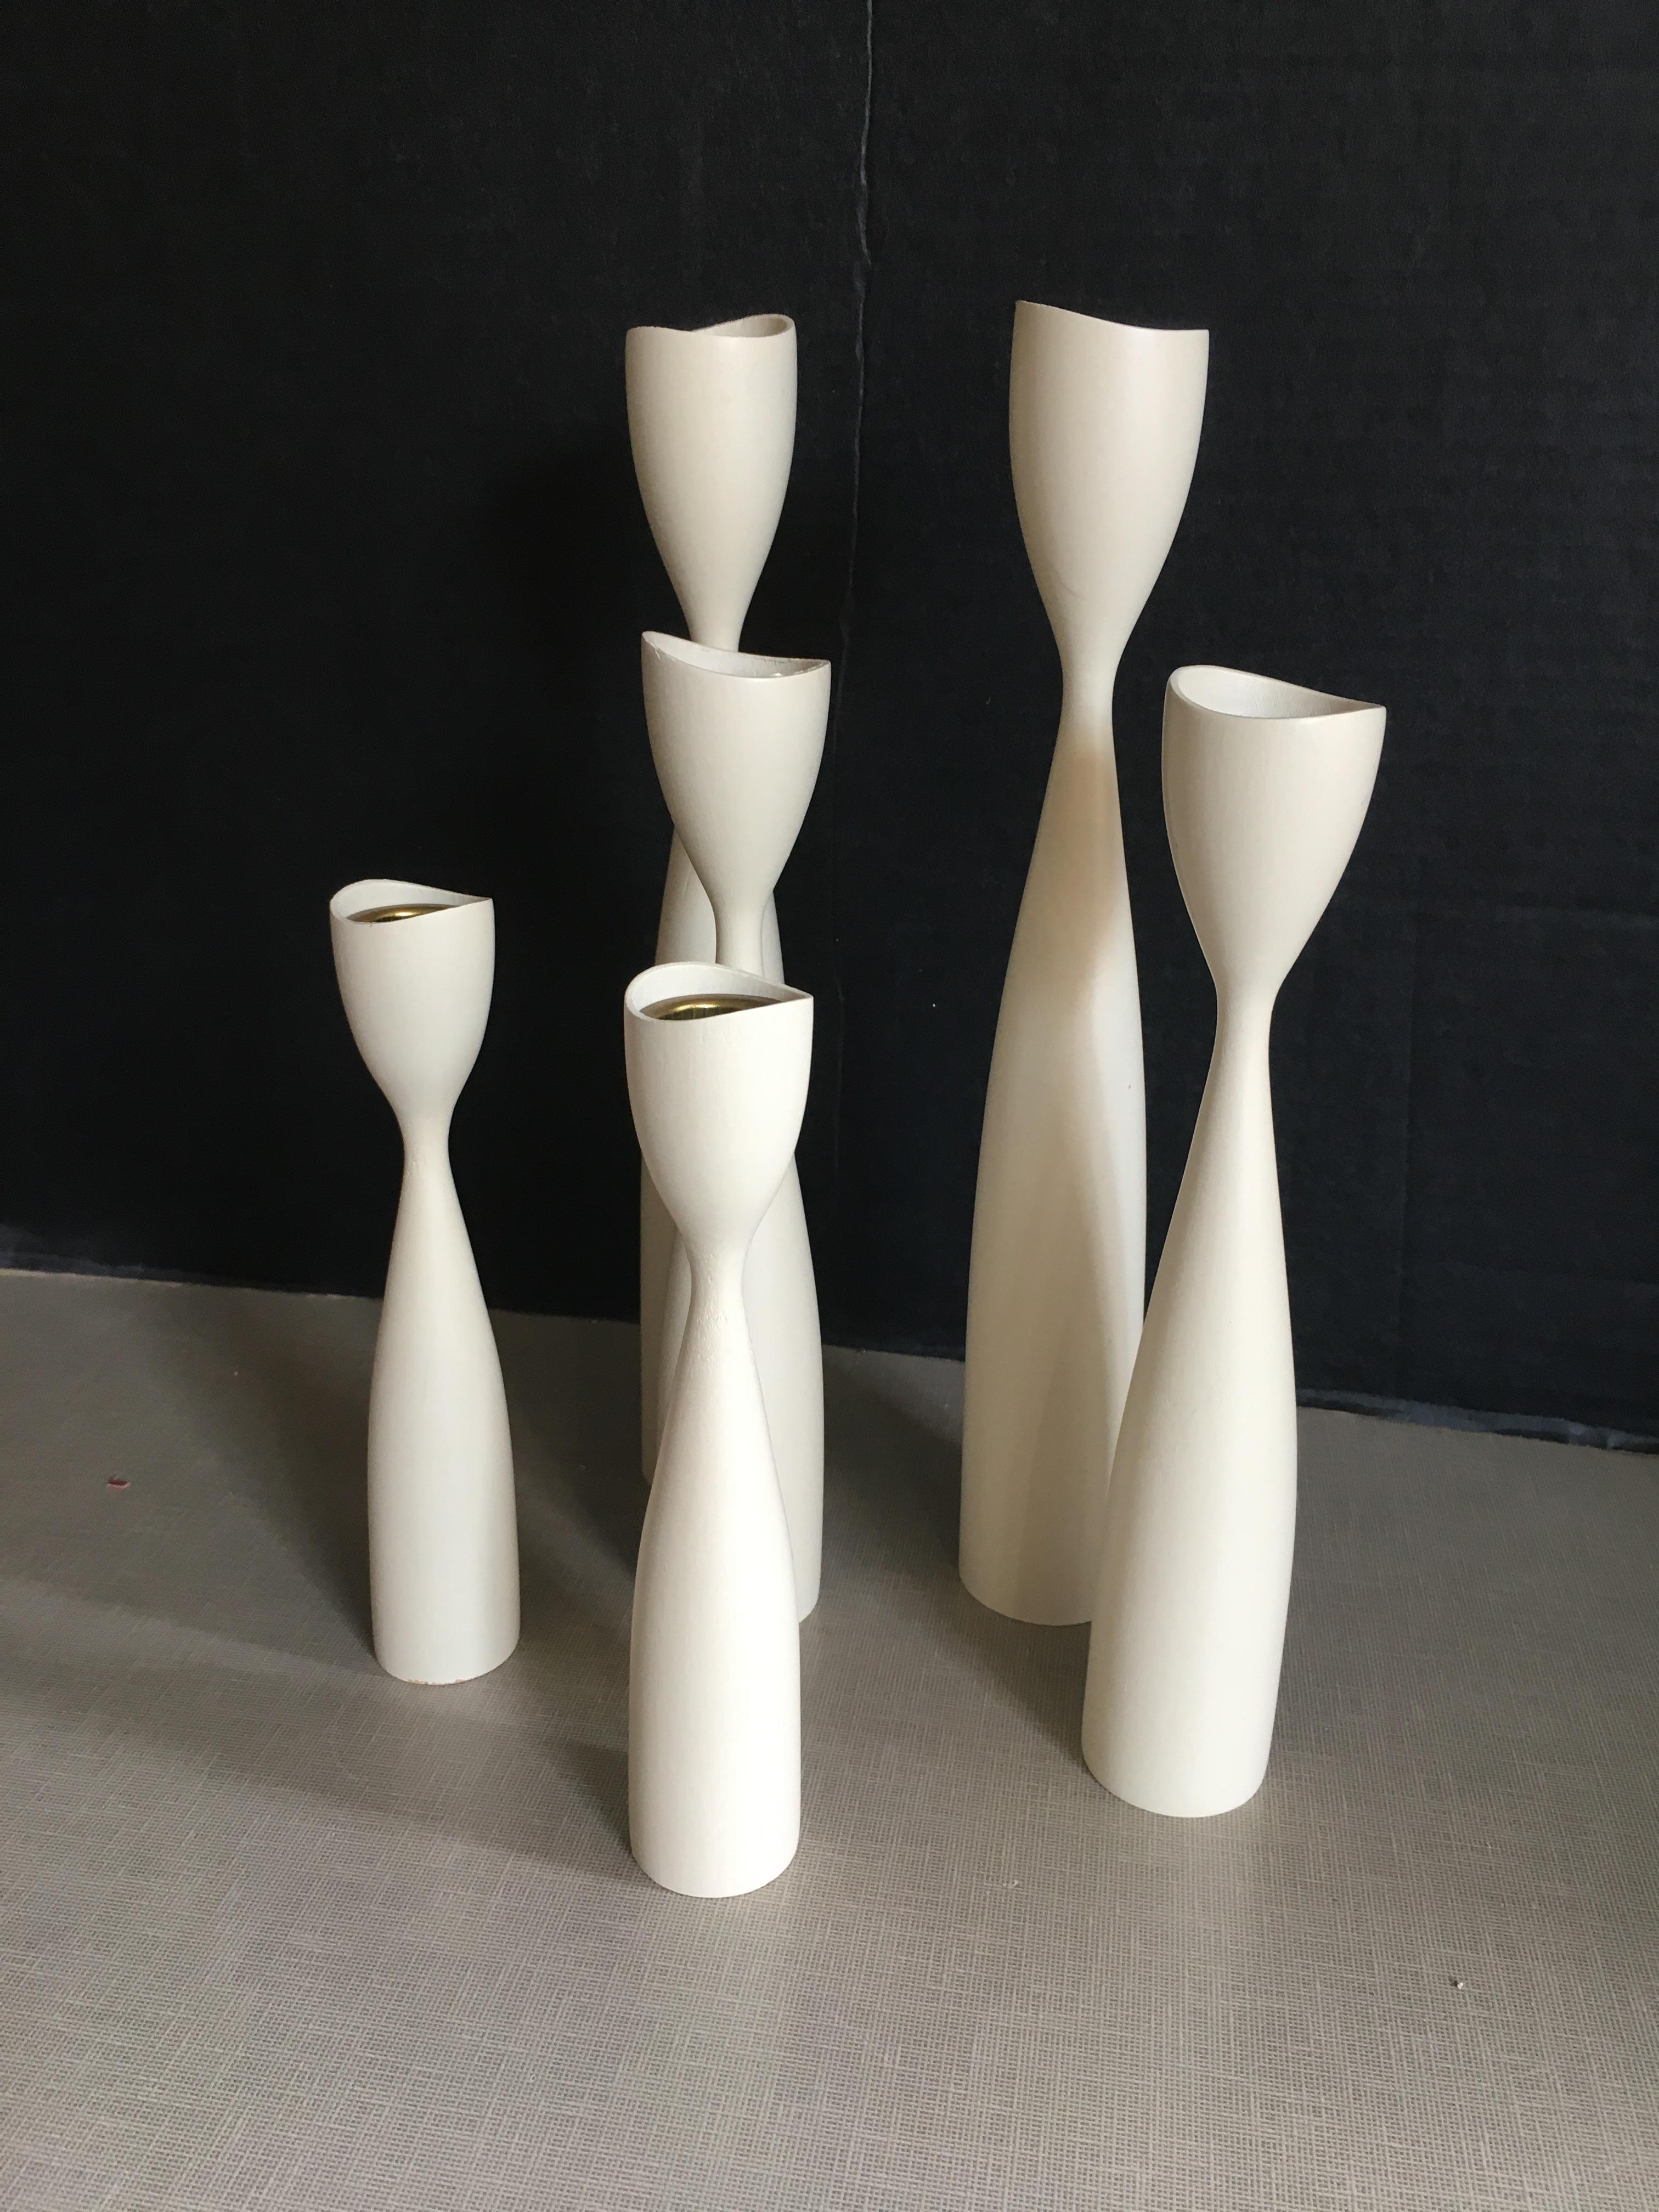 A collection of 6 off-white teak Danish midcentury candlesticks.